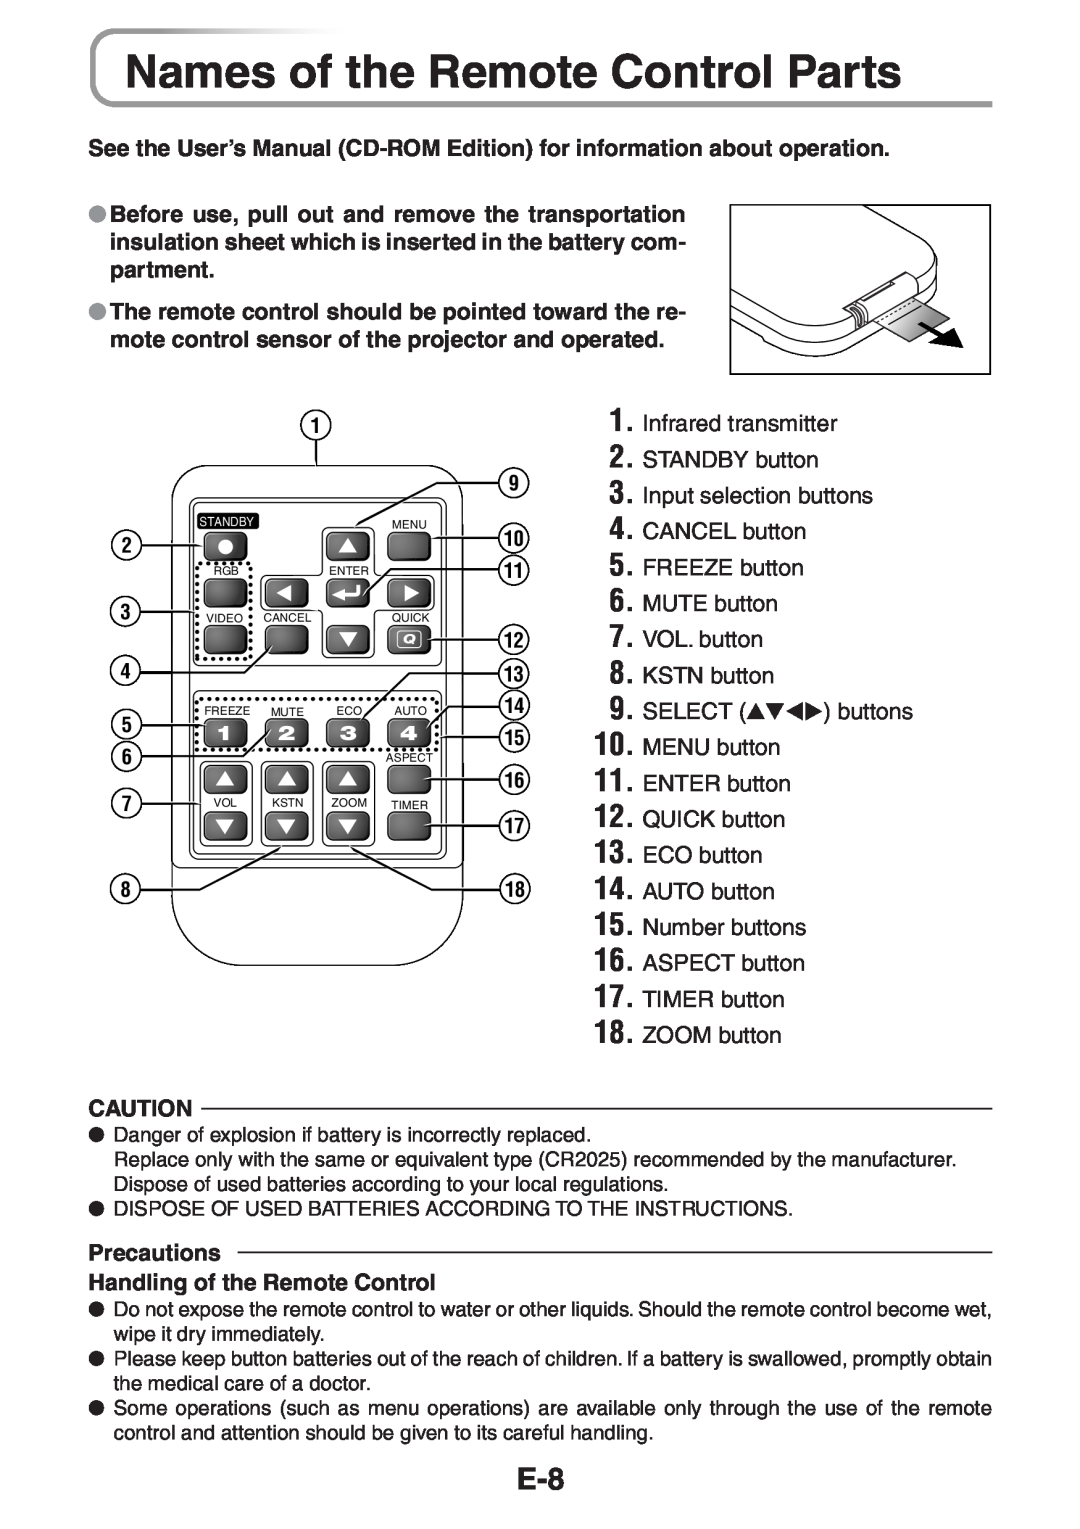 3M PX5 user manual Names of the Remote Control Parts, Infrared transmitter 2. STANDBY button 3. Input selection buttons 